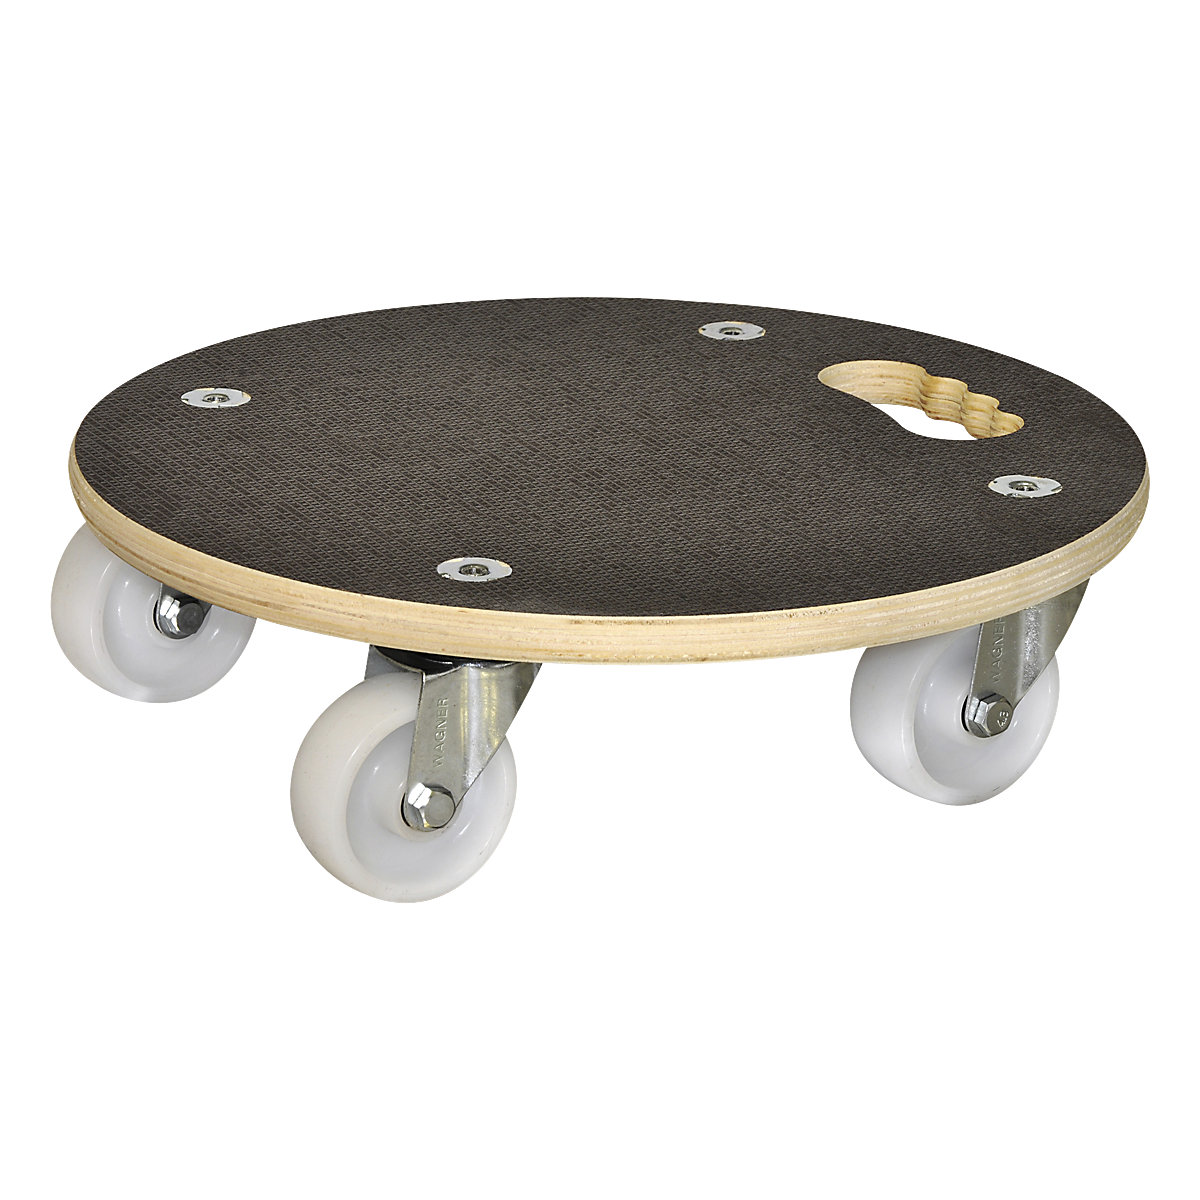 MaxiGRIP transport dolly, round – Wagner, GH 1108, phenolic plywood panel, Ø 380 mm, max. load 250 kg, 2+ items-1